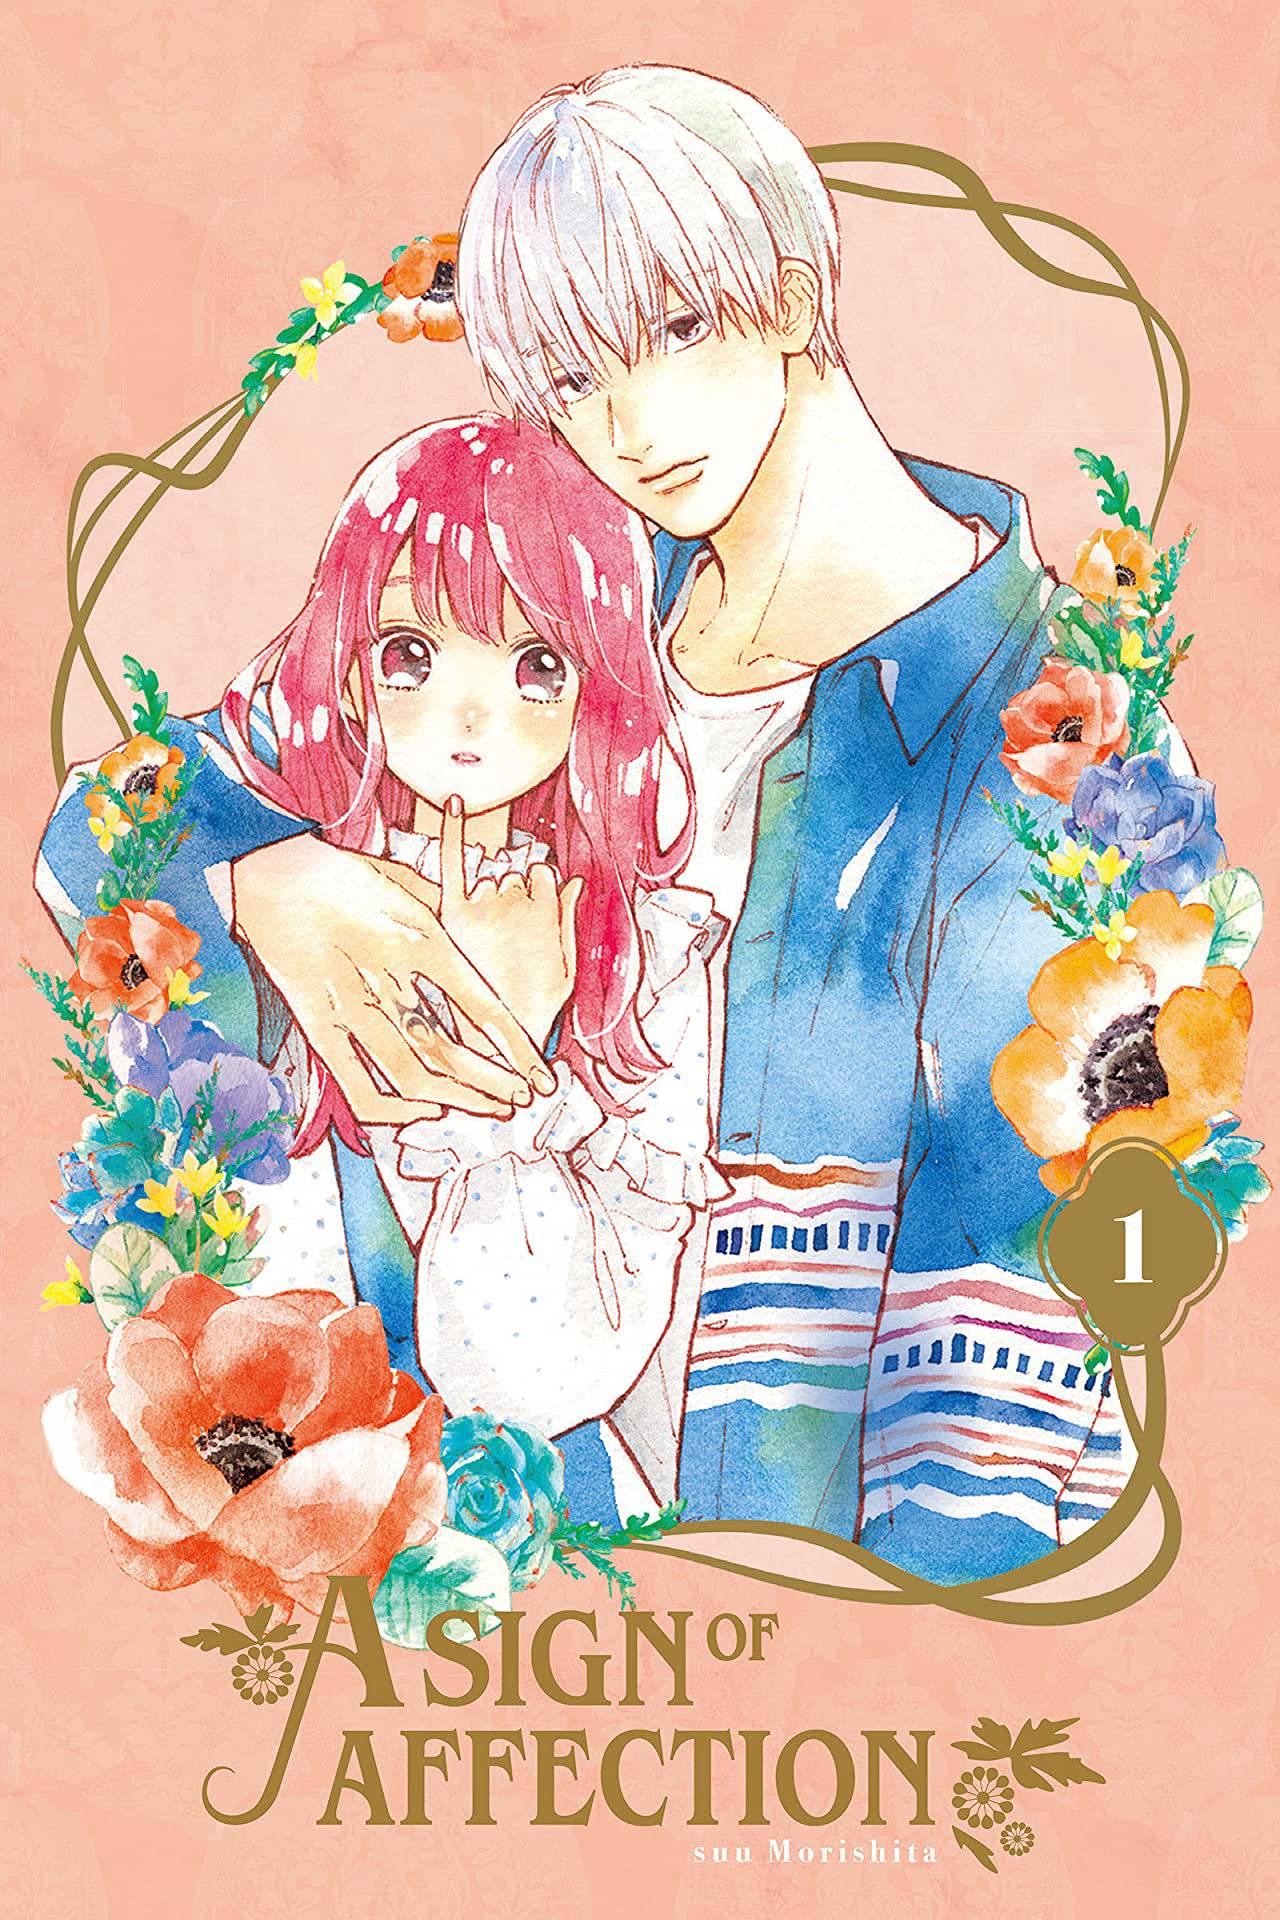 within a border of flowers, a white-haired boy wraps his arm around a girl with long pink hair, holding her close. The girl holds a hand up towards her face, her pinkie outstretched to touch her chin.